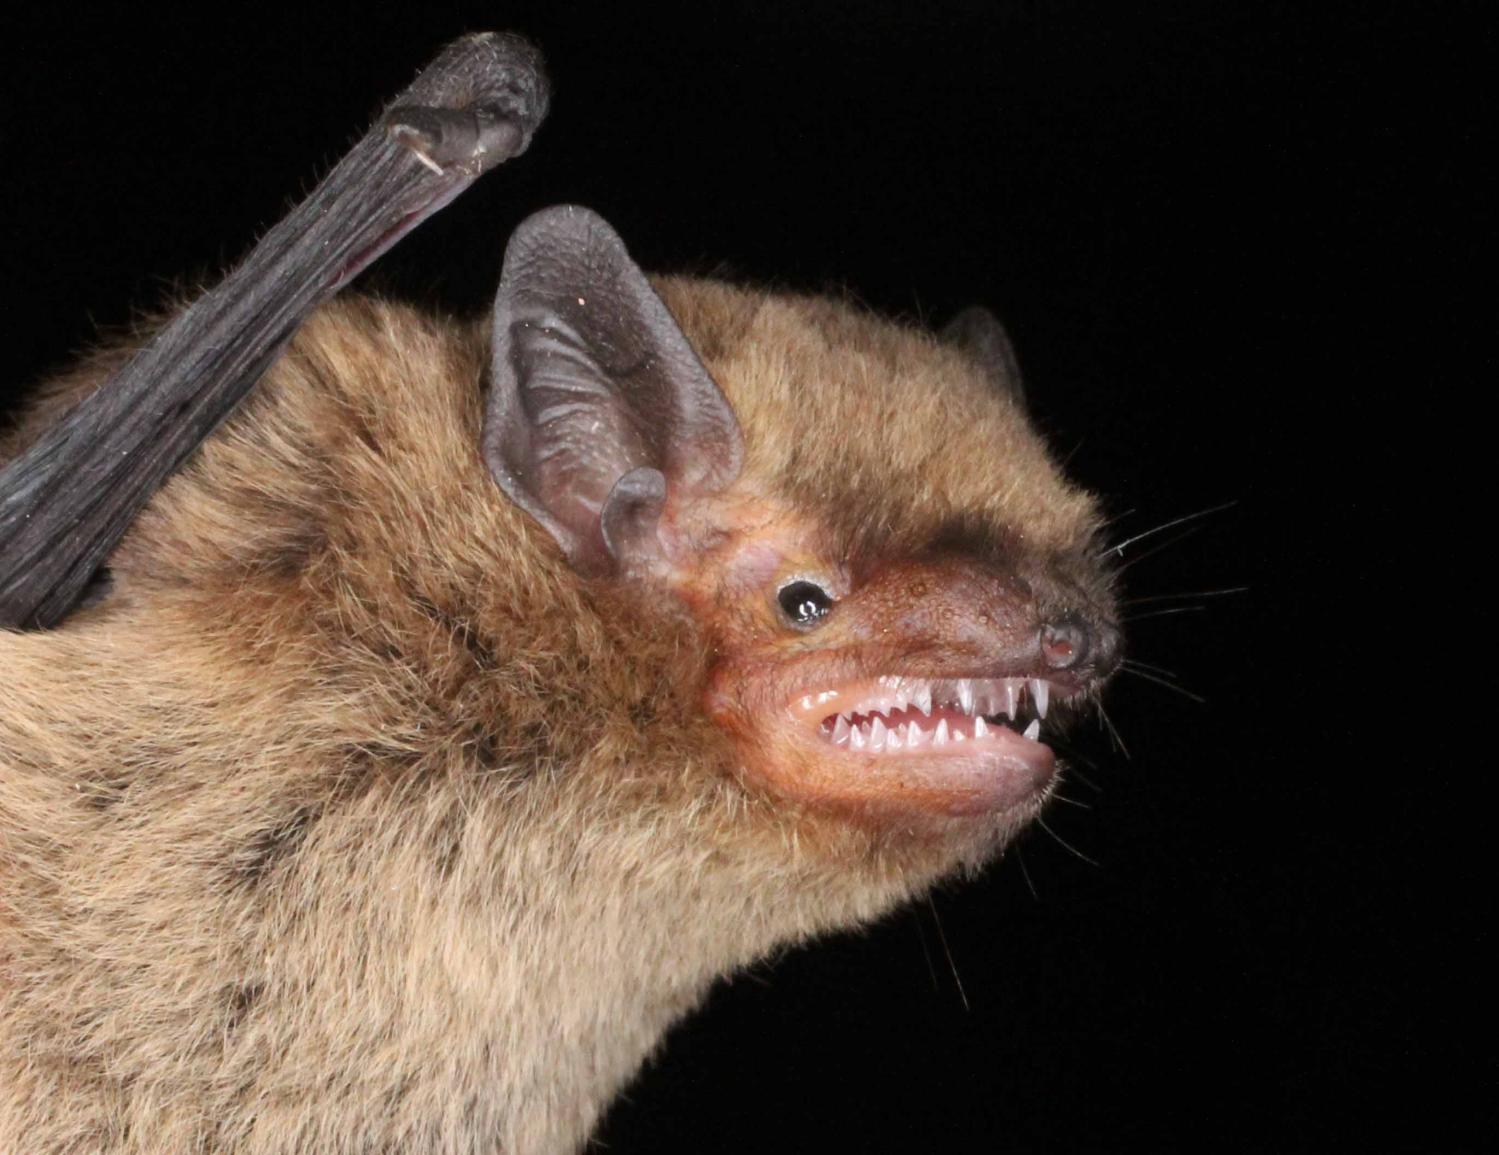 Will bats stay away from light?